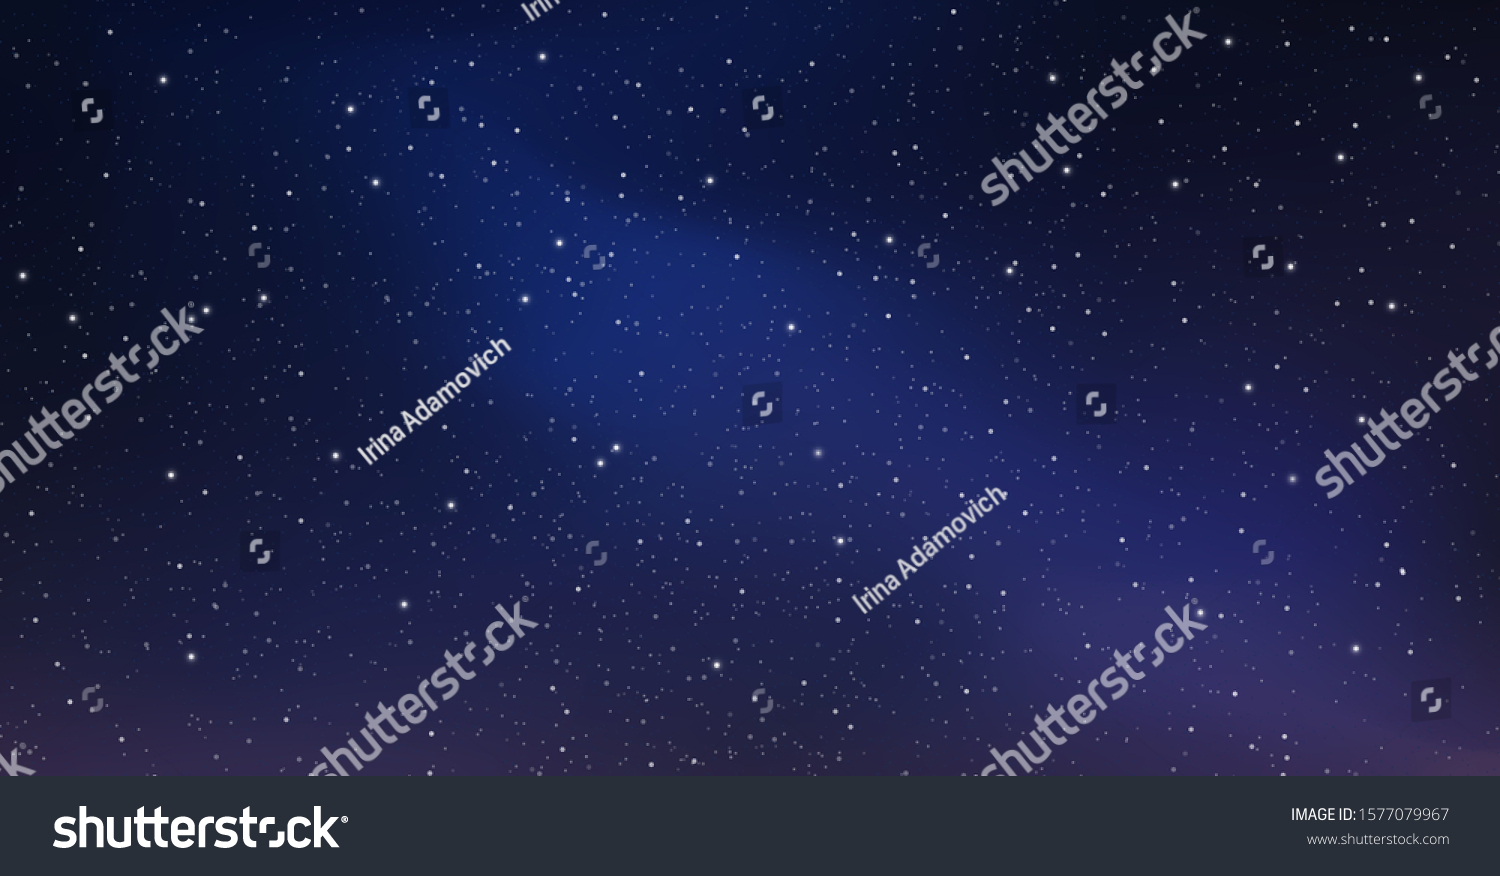 Night starry sky, blue shining space. Abstract background with stars, cosmos. Vector illustration for banner, brochure, web design #1577079967